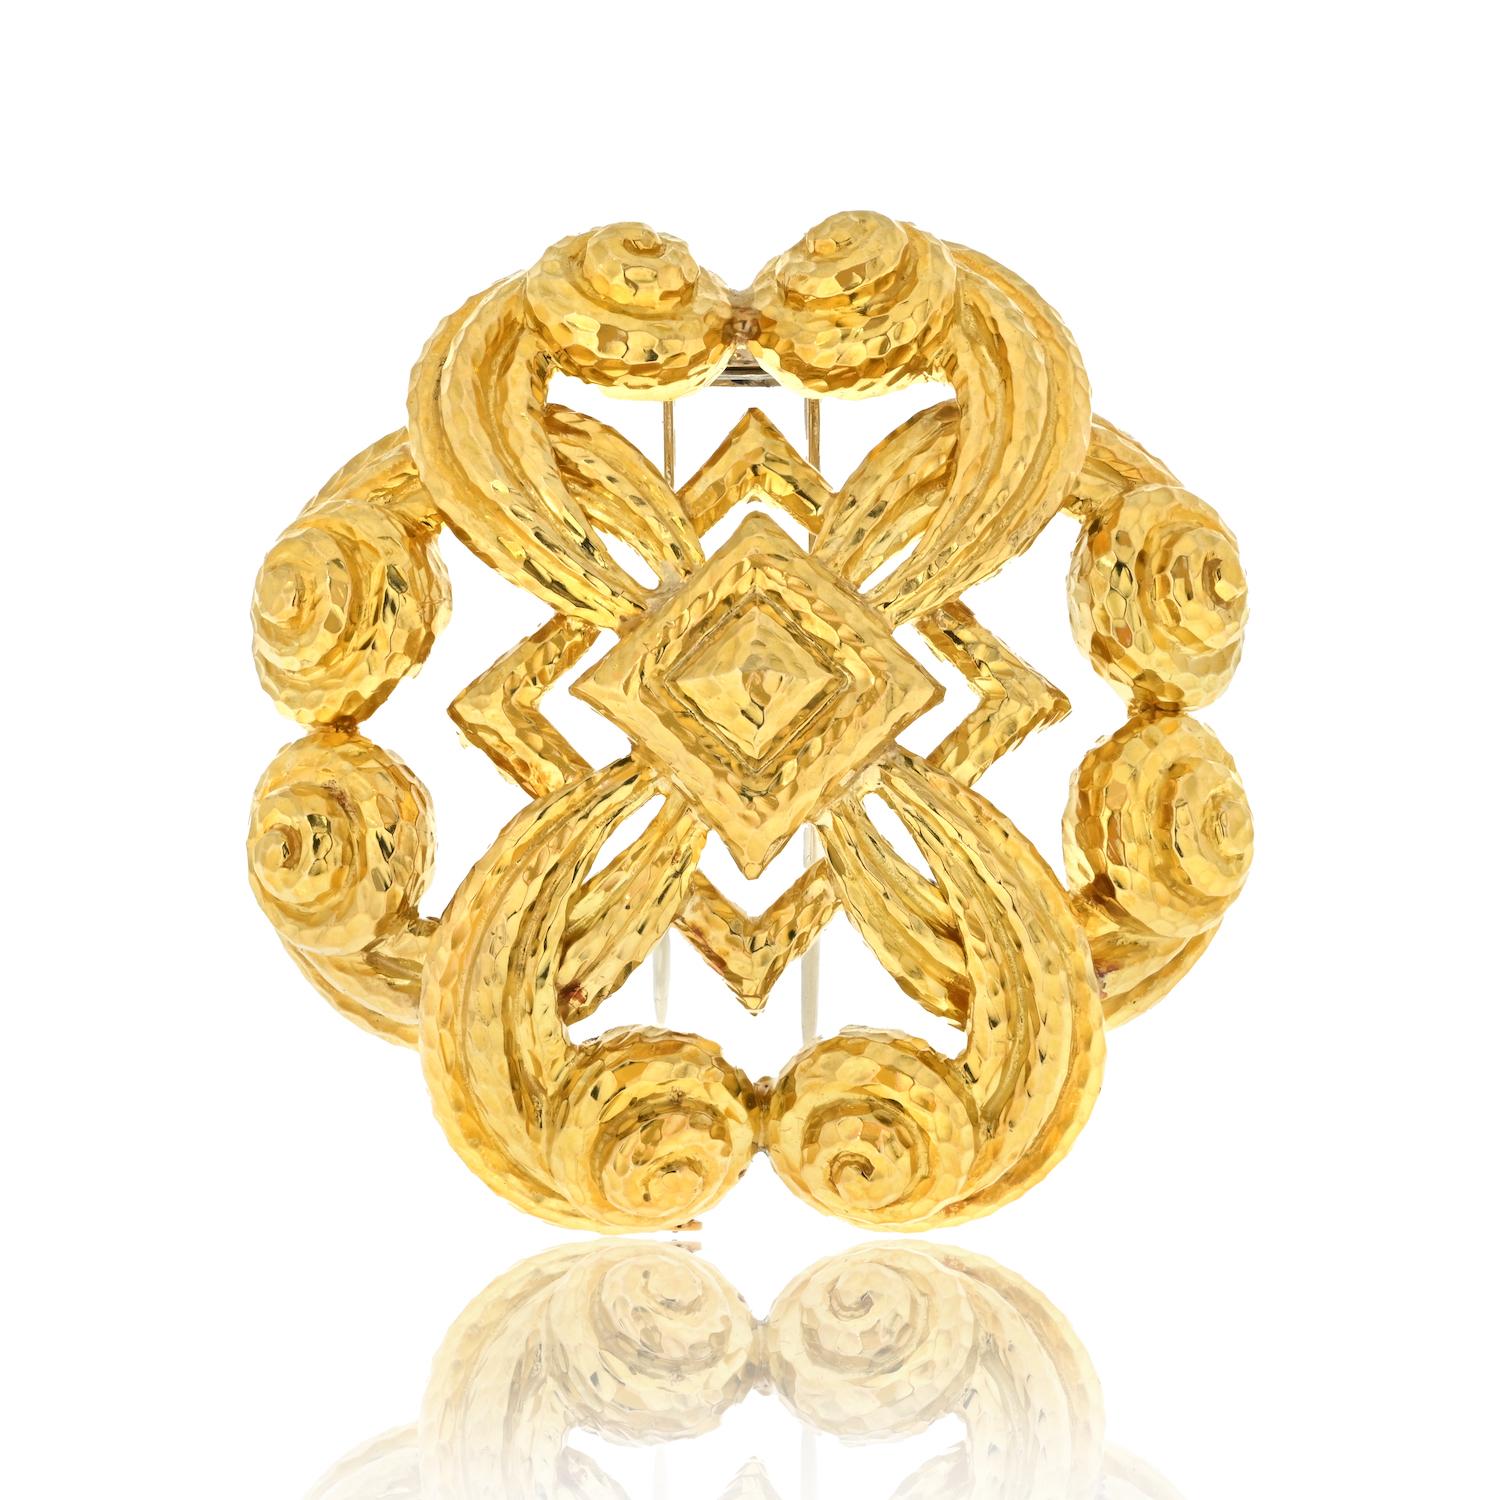 Adorn yourself with timeless elegance through the David Webb 18K Yellow Gold Scrolled Hammered Brooch. 

Measuring 2.5 inches wide, this exquisite piece showcases the meticulous craftsmanship of David Webb. 

The scrolled and hammered design,